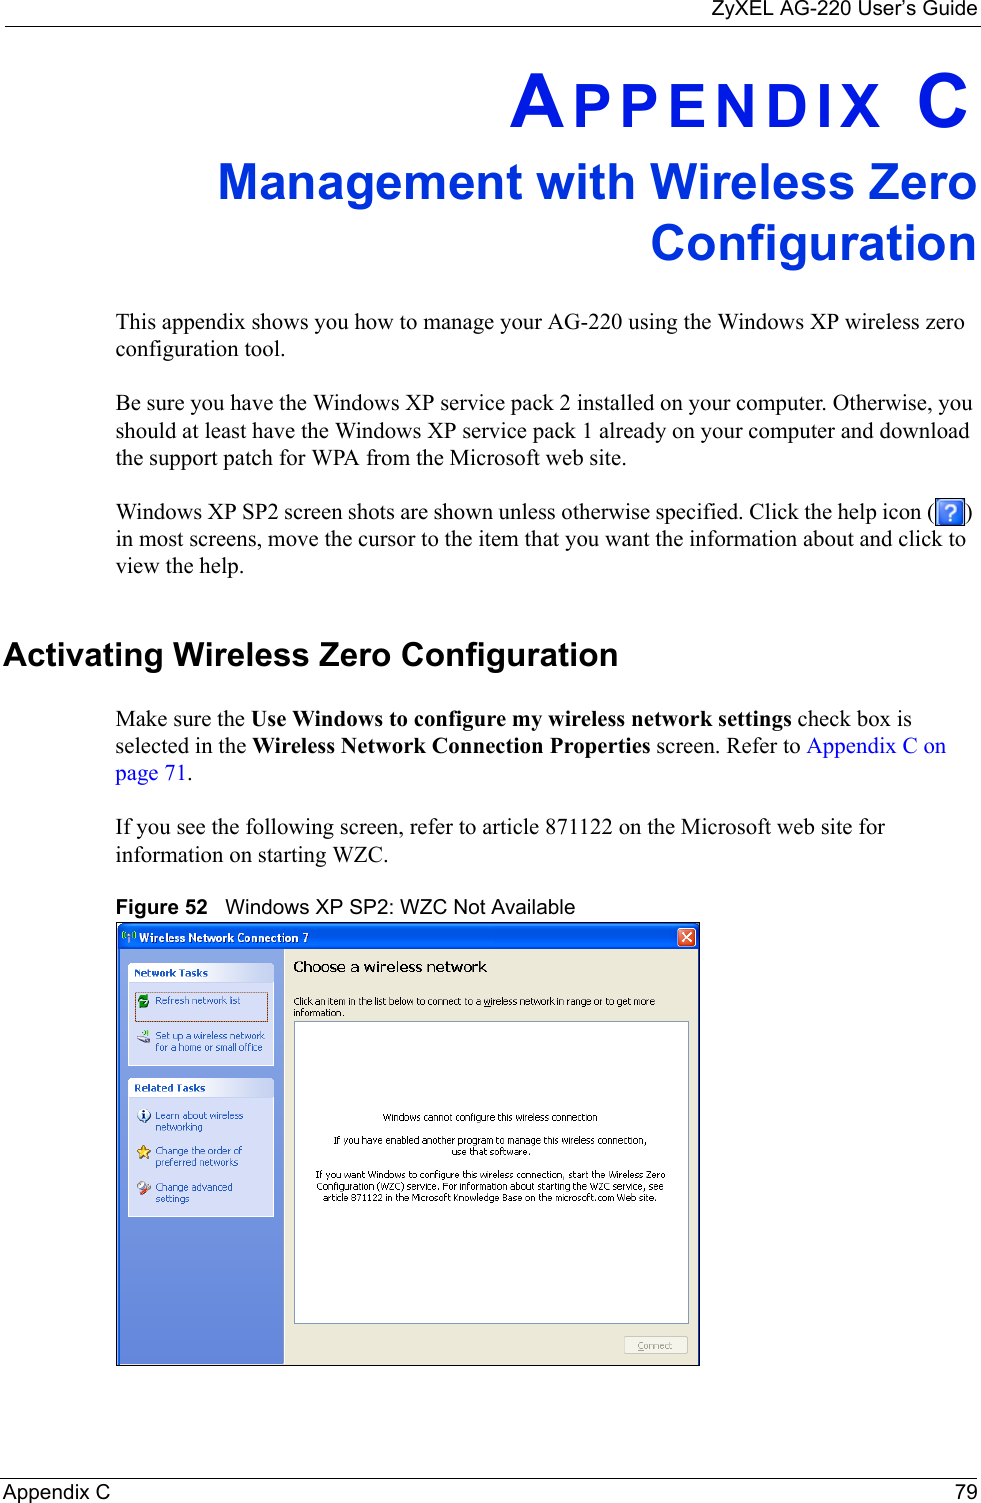 ZyXEL AG-220 User’s GuideAppendix C 79APPENDIX CManagement with Wireless ZeroConfigurationThis appendix shows you how to manage your AG-220 using the Windows XP wireless zero configuration tool.Be sure you have the Windows XP service pack 2 installed on your computer. Otherwise, you should at least have the Windows XP service pack 1 already on your computer and download the support patch for WPA from the Microsoft web site.Windows XP SP2 screen shots are shown unless otherwise specified. Click the help icon ( ) in most screens, move the cursor to the item that you want the information about and click to view the help.Activating Wireless Zero ConfigurationMake sure the Use Windows to configure my wireless network settings check box is selected in the Wireless Network Connection Properties screen. Refer to Appendix C on page 71.If you see the following screen, refer to article 871122 on the Microsoft web site for information on starting WZC.Figure 52   Windows XP SP2: WZC Not Available